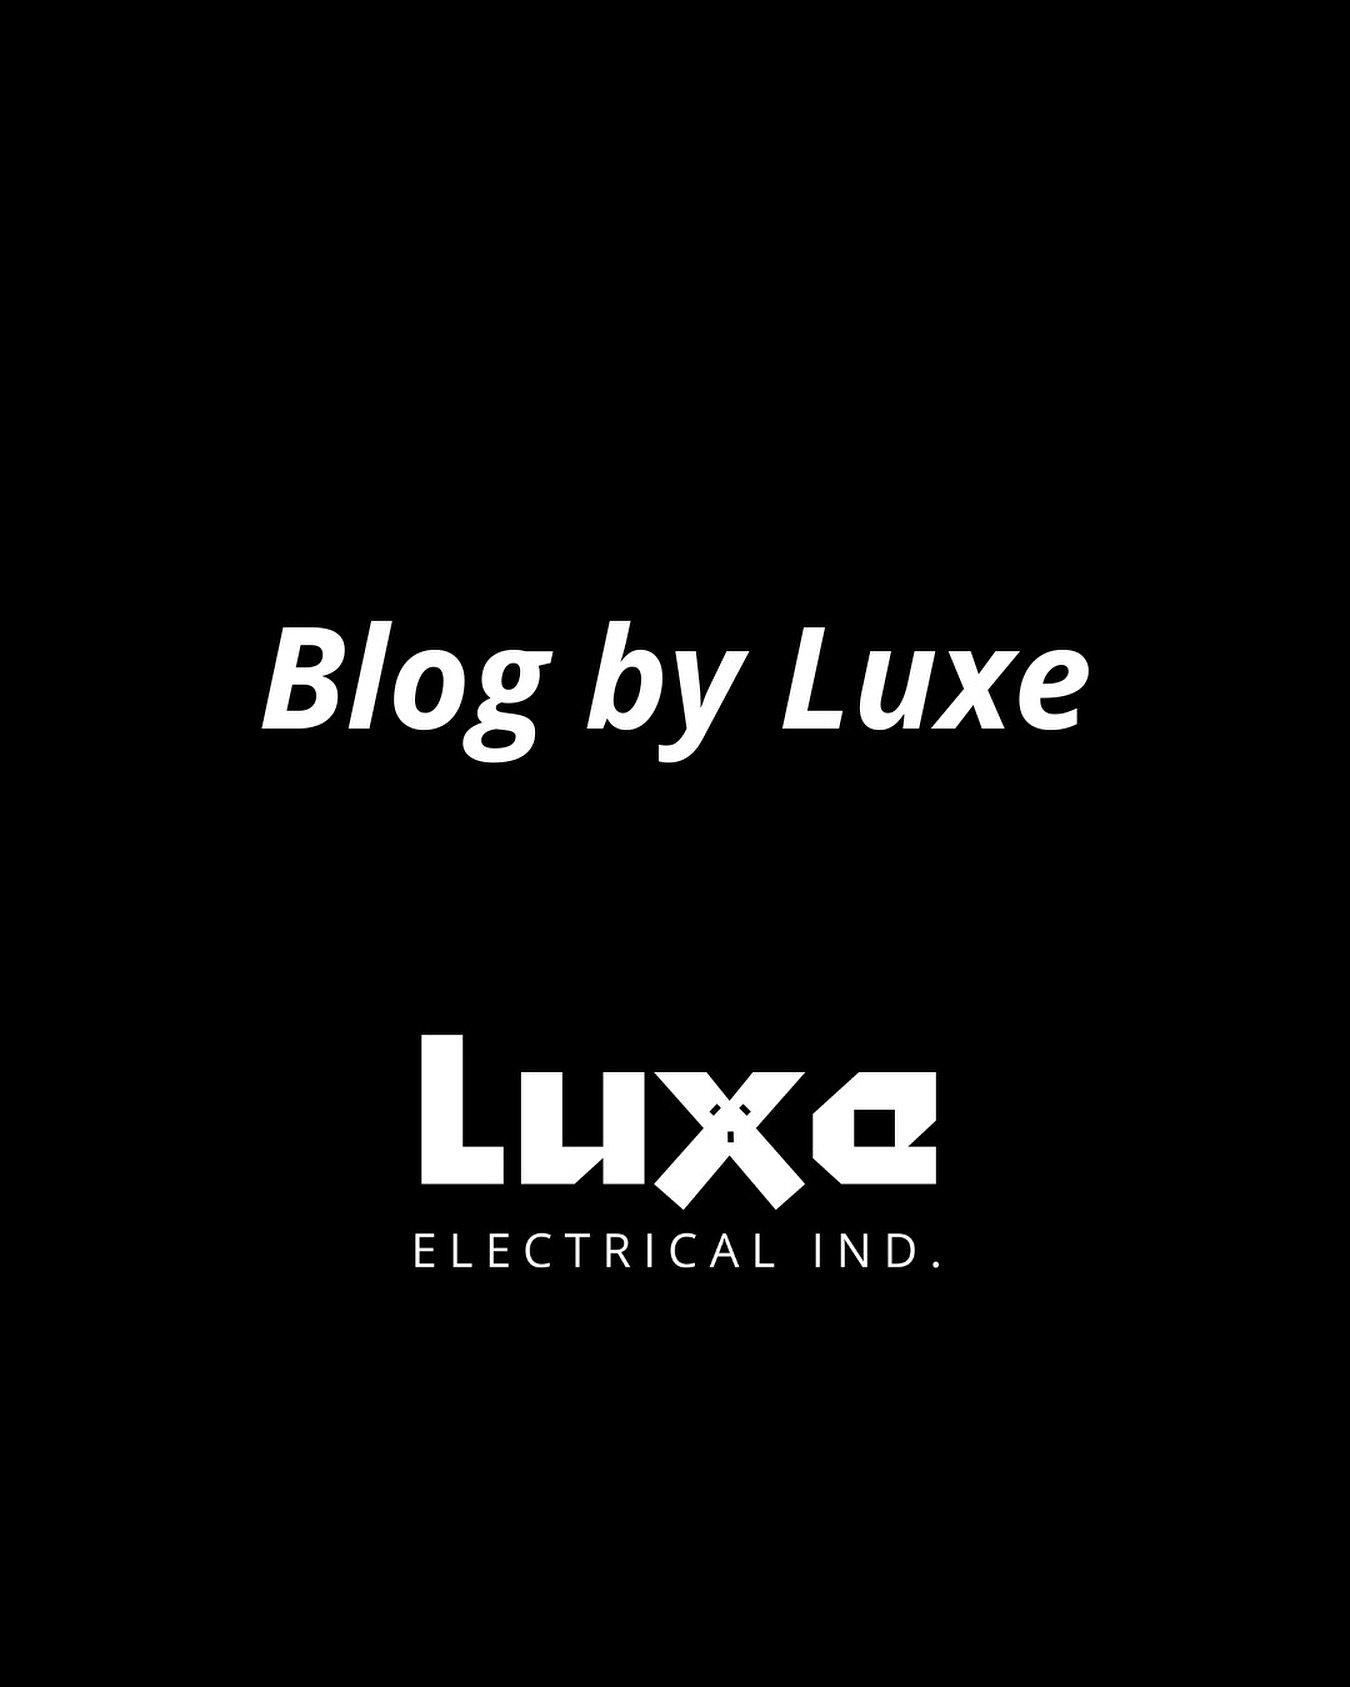 Check out &ldquo;Blog by Luxe&rdquo; for educational content designed to give back to our community. Whether you&rsquo;re looking for expert advice, helpful tips or answers to your questions, we&rsquo;ve got you covered.

There are two new posts on: 